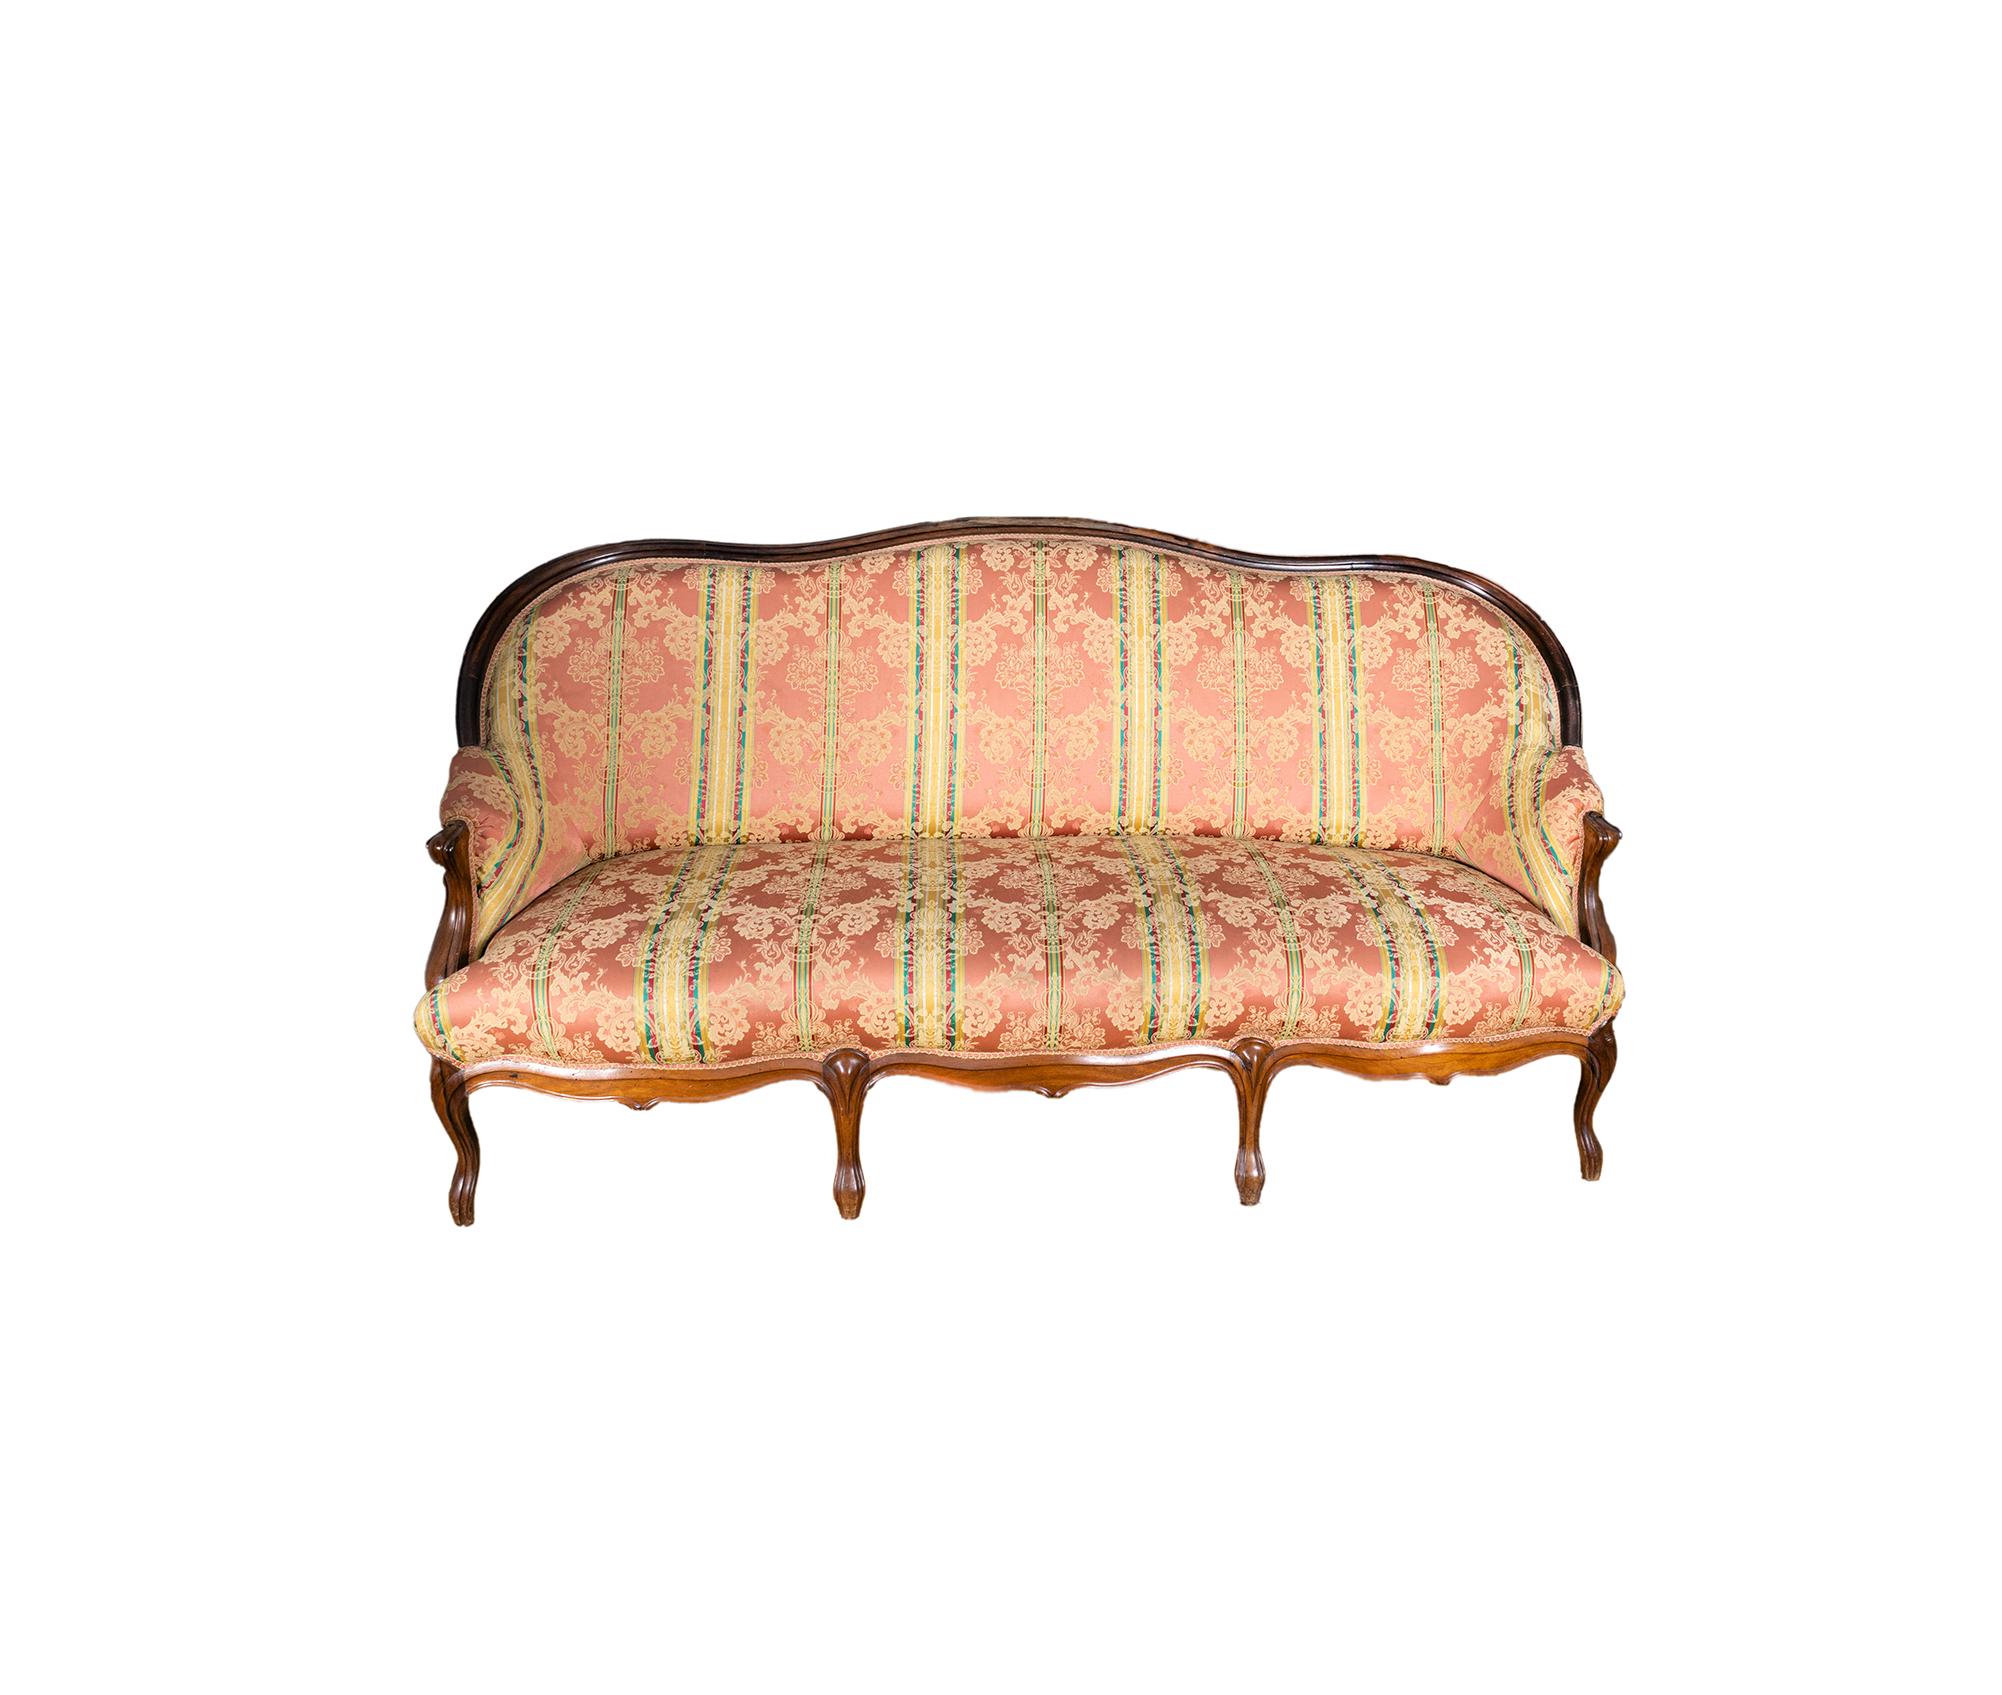 A one of a kind rosewood solid canapé sofa with flawless luxury fabric and upholstery pink background with an intrinsically detailed monogram work.  
D. José Style from the second half of the 18th century, of Rococo influence, has slender, slightly